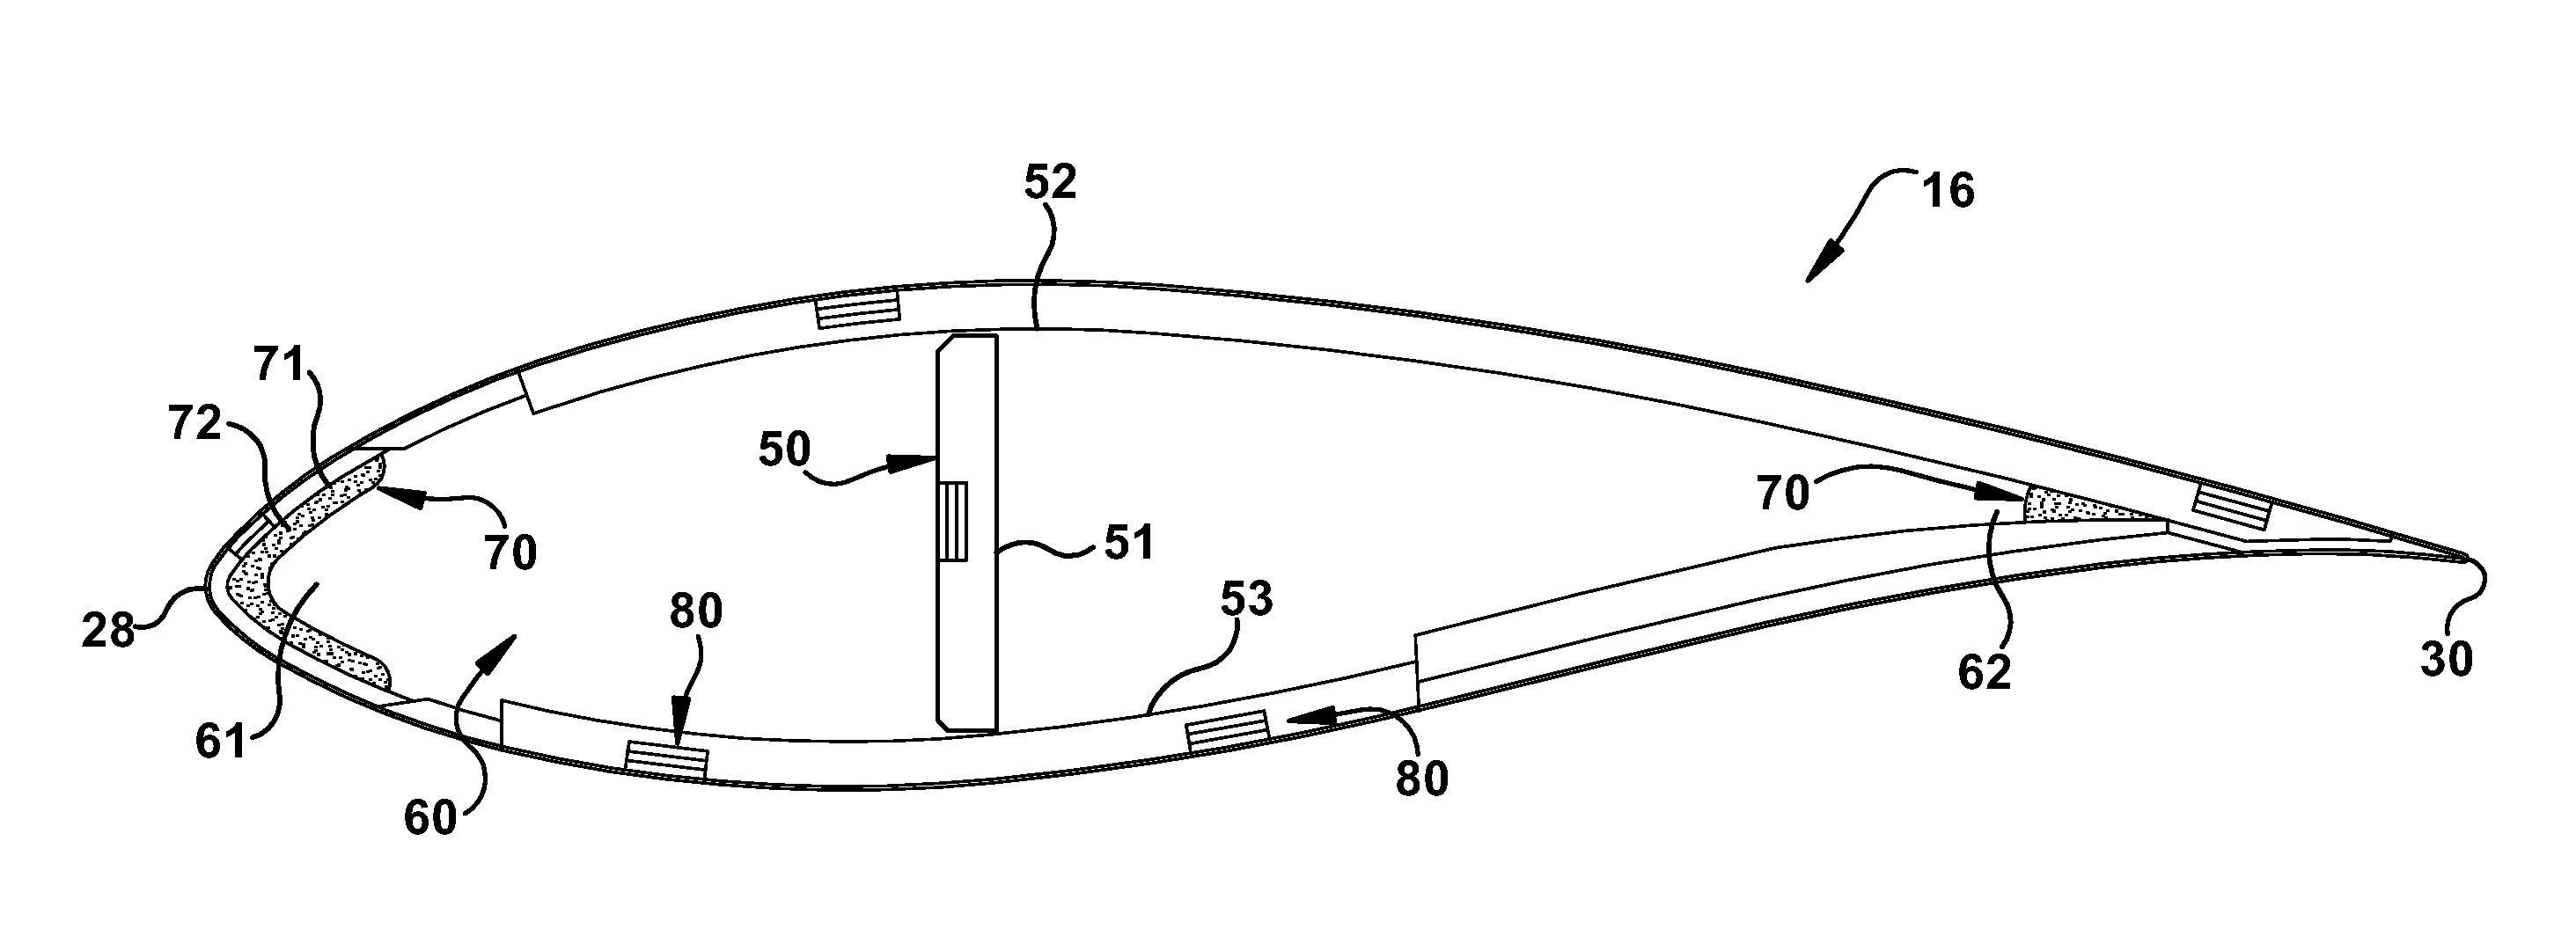 Wind turbines and wind turbine rotor blades with reduced radar cross sections